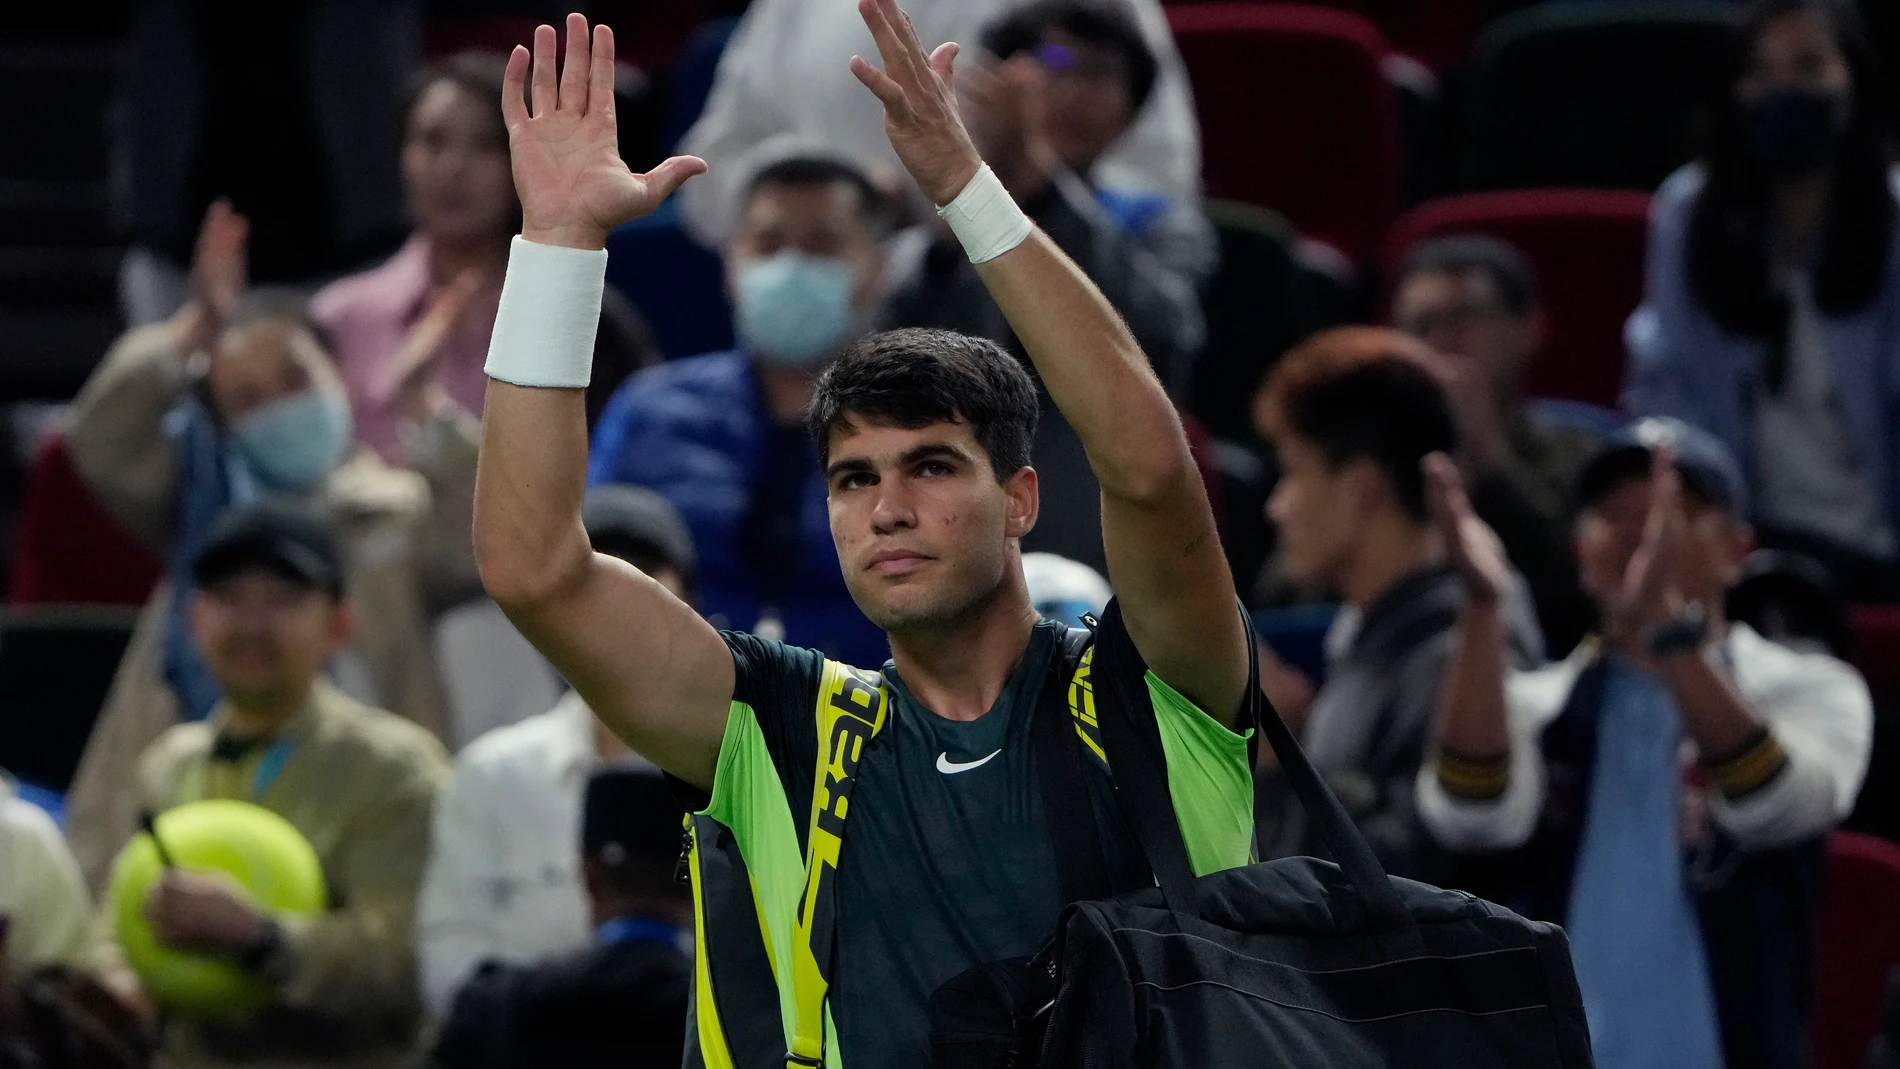 Carlos Alcaraz of Spain gestures as he leaves the court after defeated by Grigor Dimitrov of Bulgaria in the 4th round of the men's singles match in the Shanghai Masters tennis tournament at Qizhong Forest Sports City Tennis Center in Shanghai, China, Wednesday, Oct. 11, 2023. (AP Photo/Andy Wong)